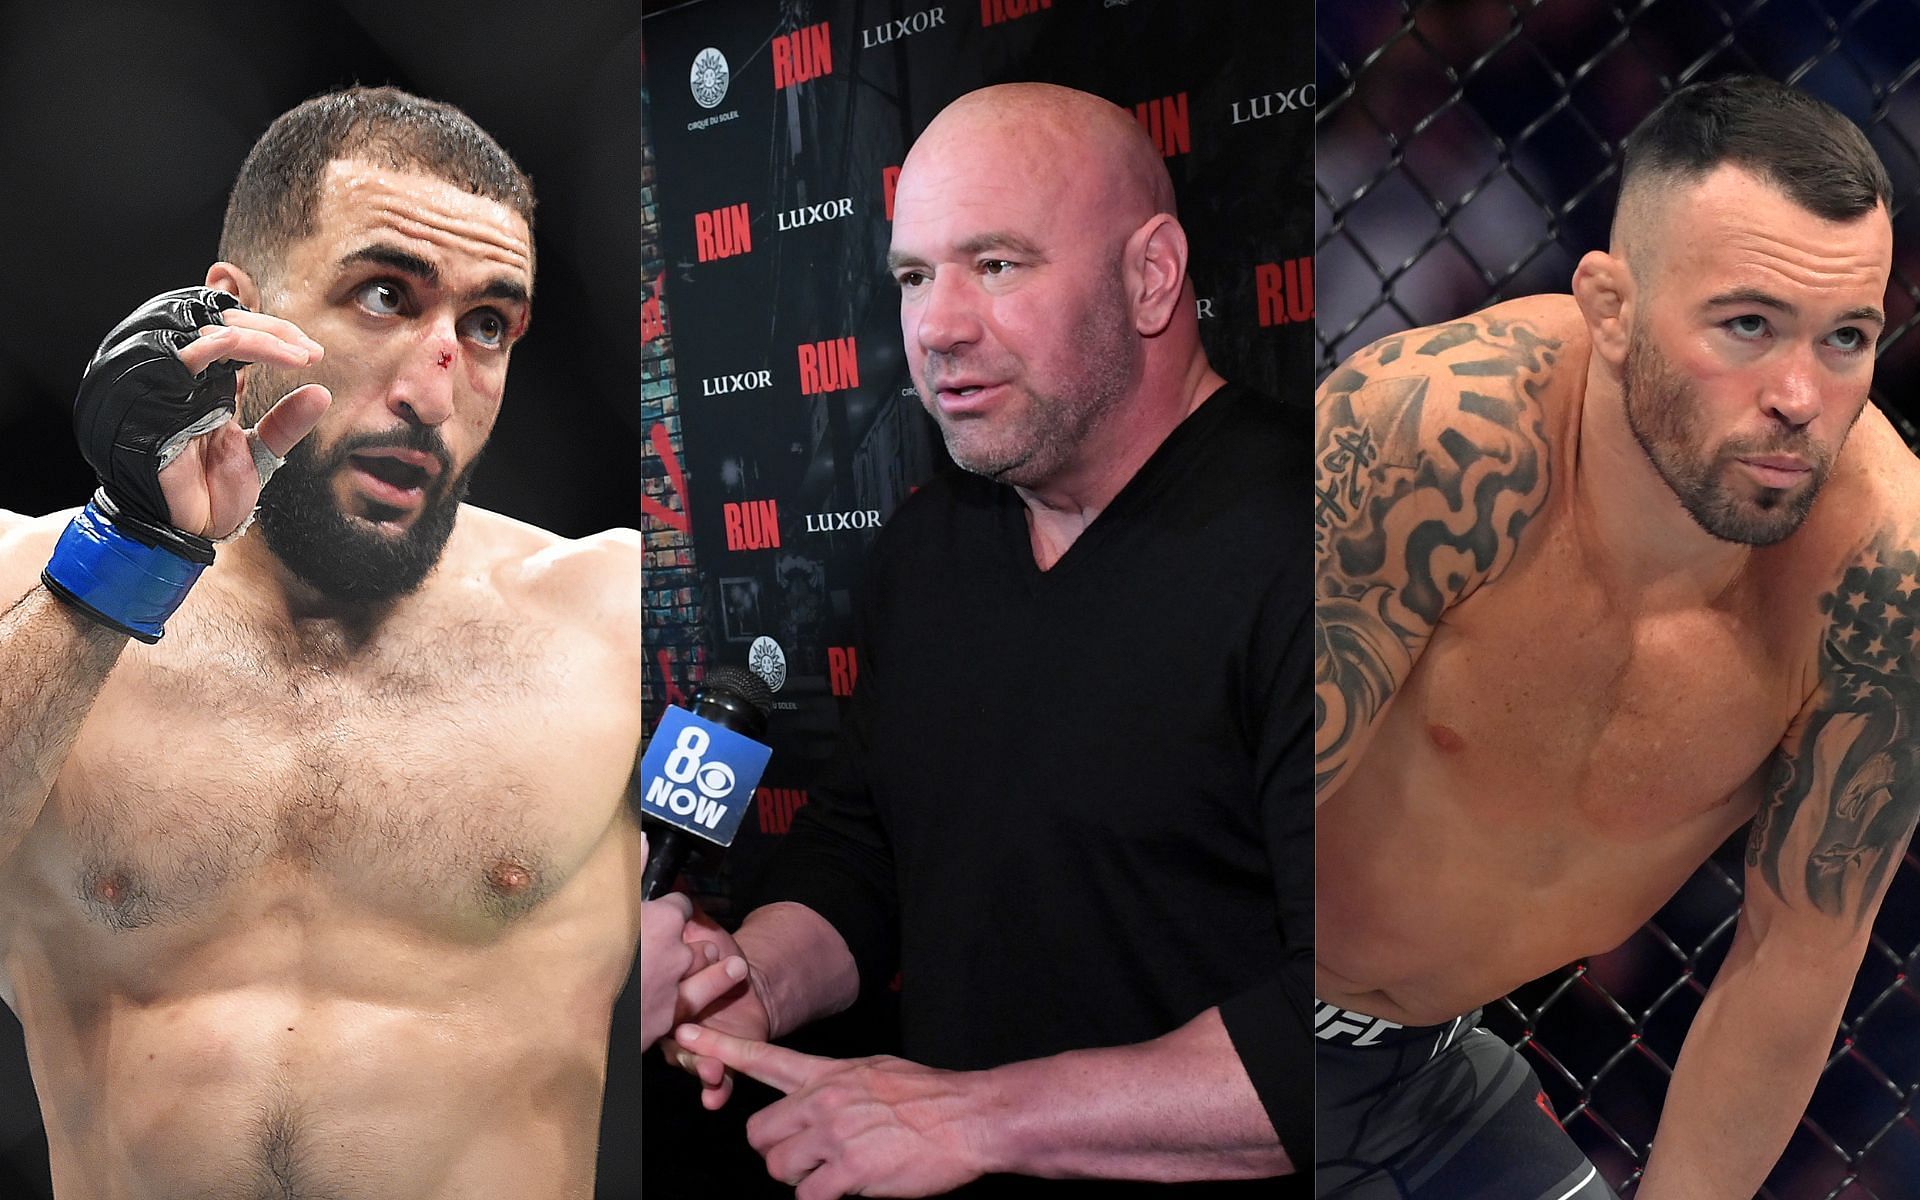 Belal Muhammad (left), Dana White (center), and Colby Covington (right) (Image credits Getty Images)